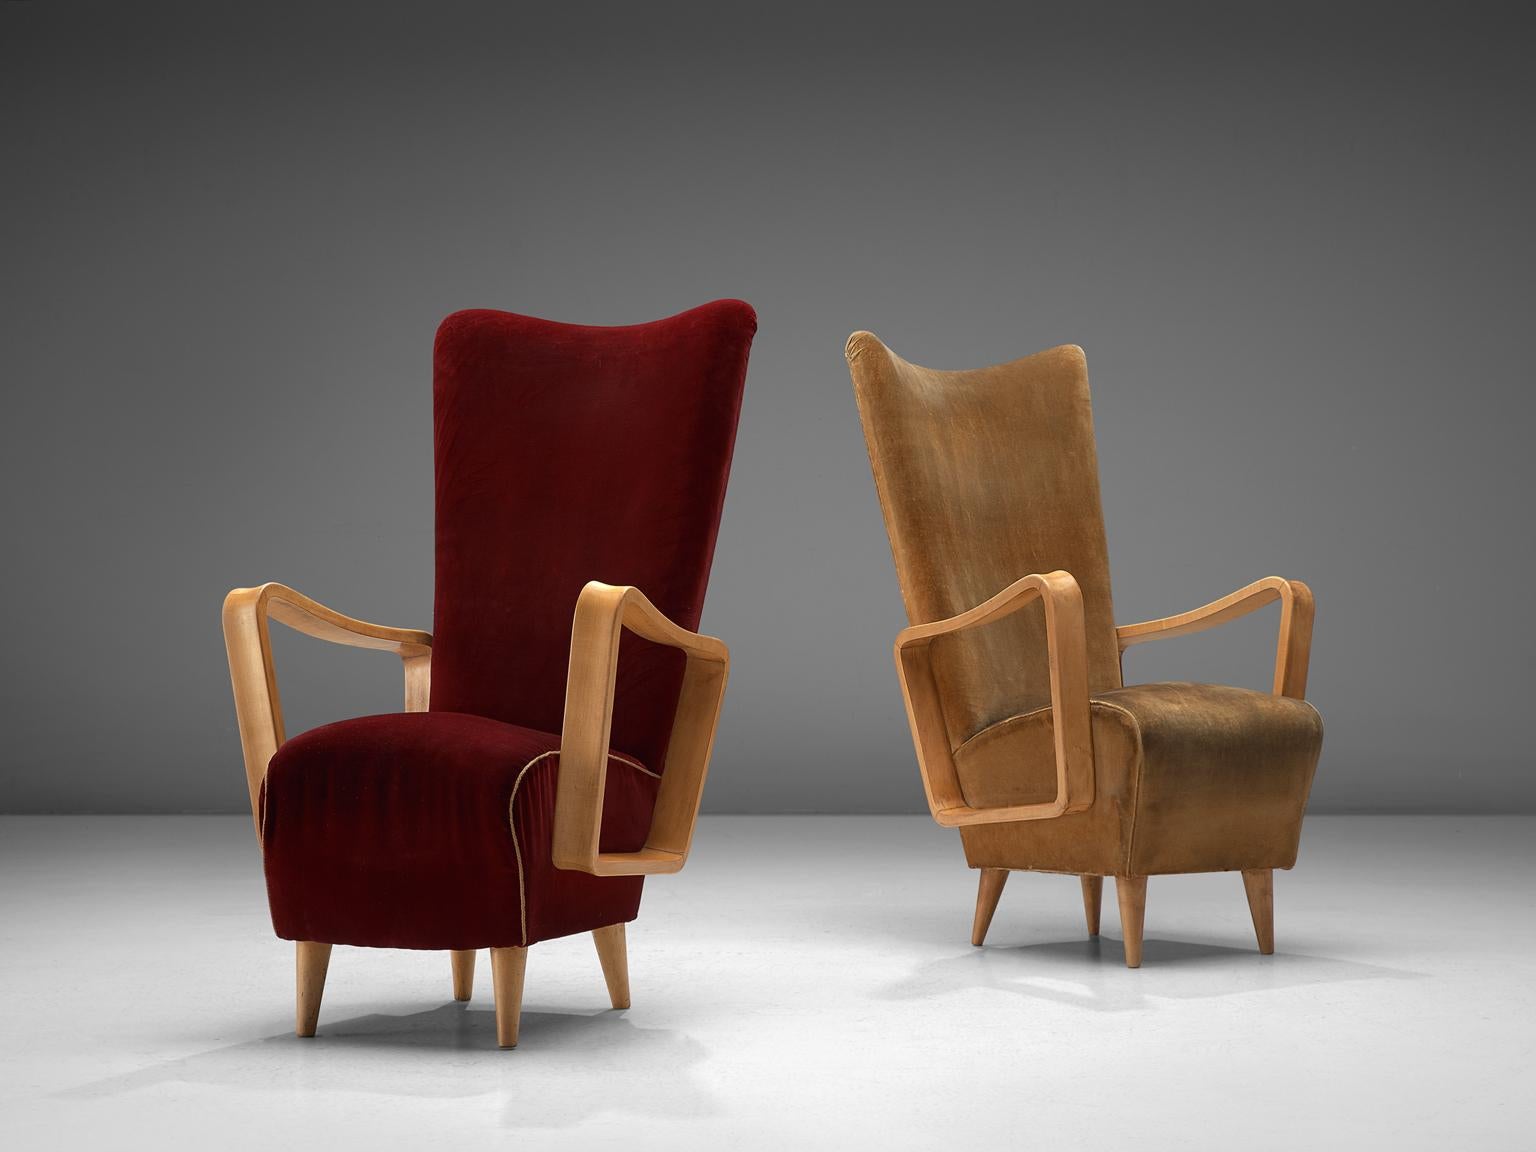 Pietro Lingeri, set of two high back chairs, fabric and beech, Italy, 1950s. 

Pair of elegant high back armchairs have a sincere, stately character. Beautifully curved yet sharp rounded edges. The back forms a beautiful long line and the seat is